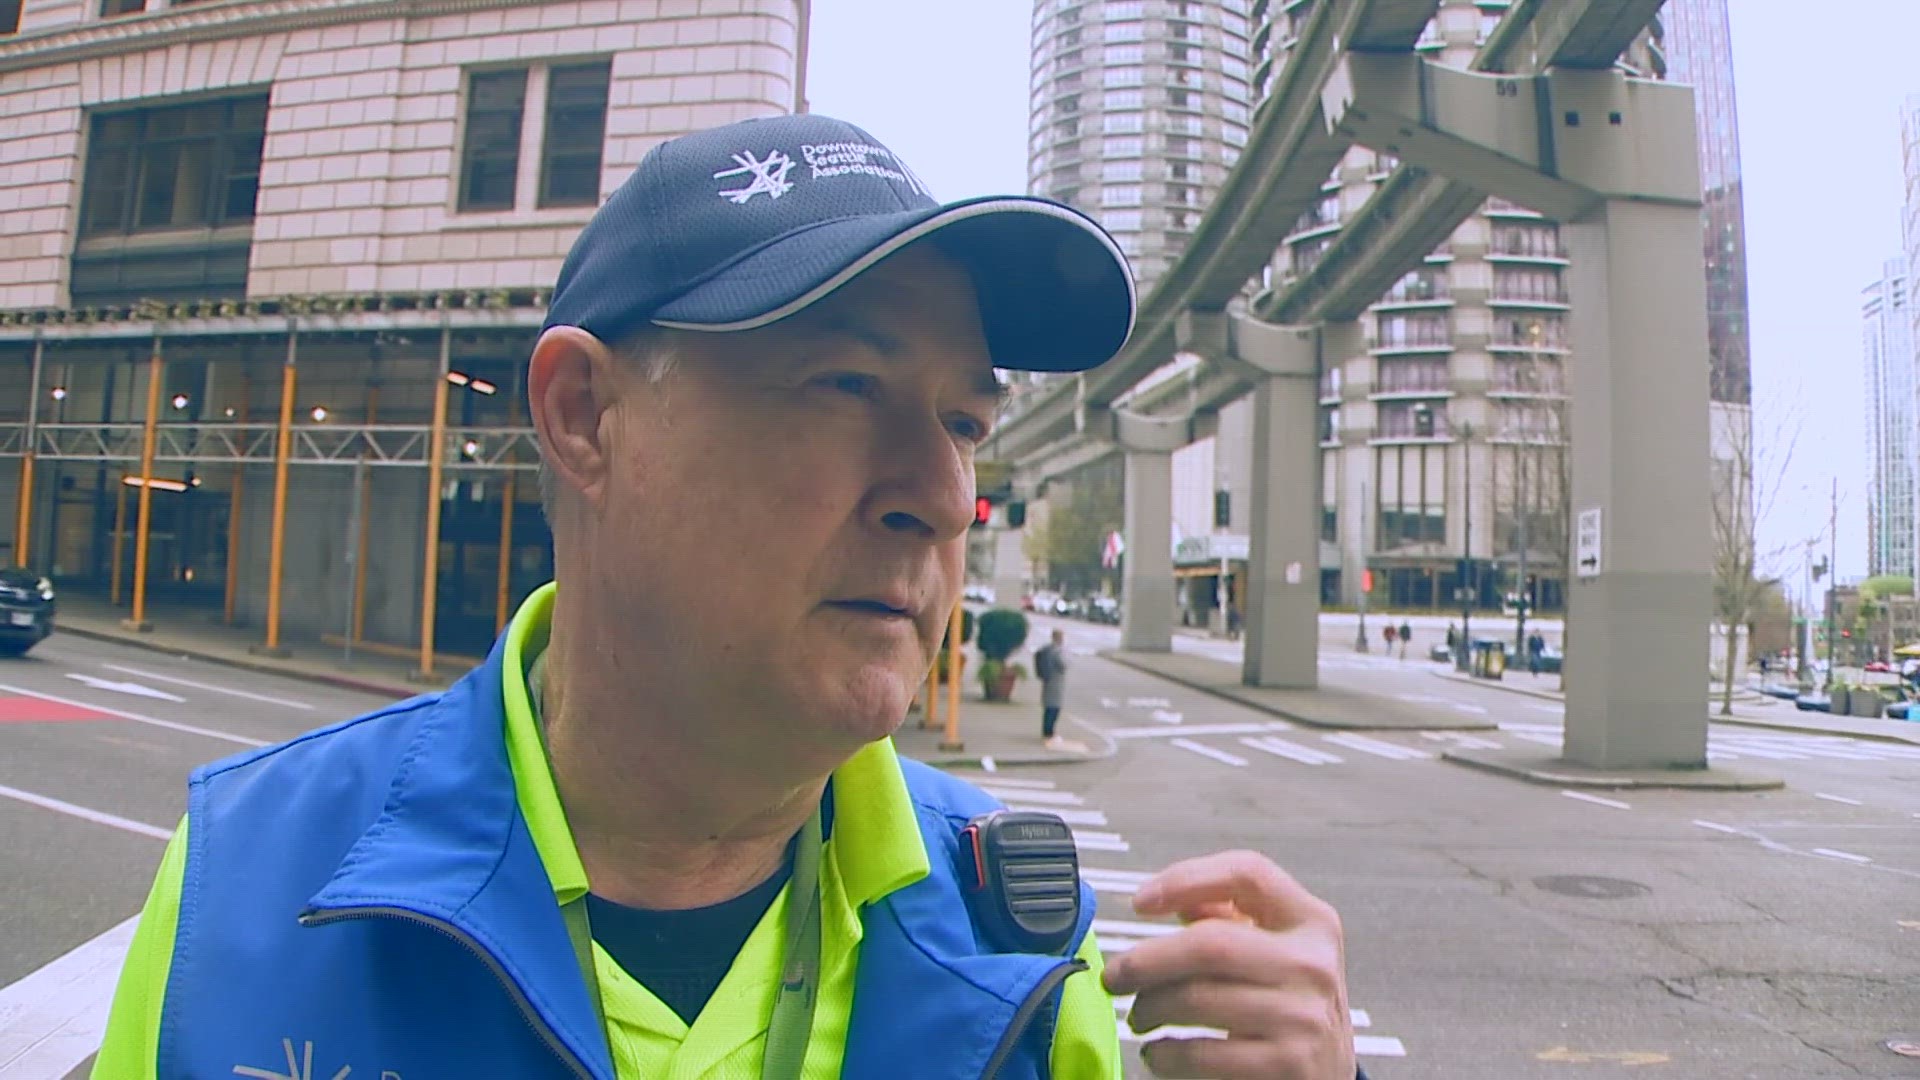 Residents can contact the Downtown Seattle Association for a free safety escort.